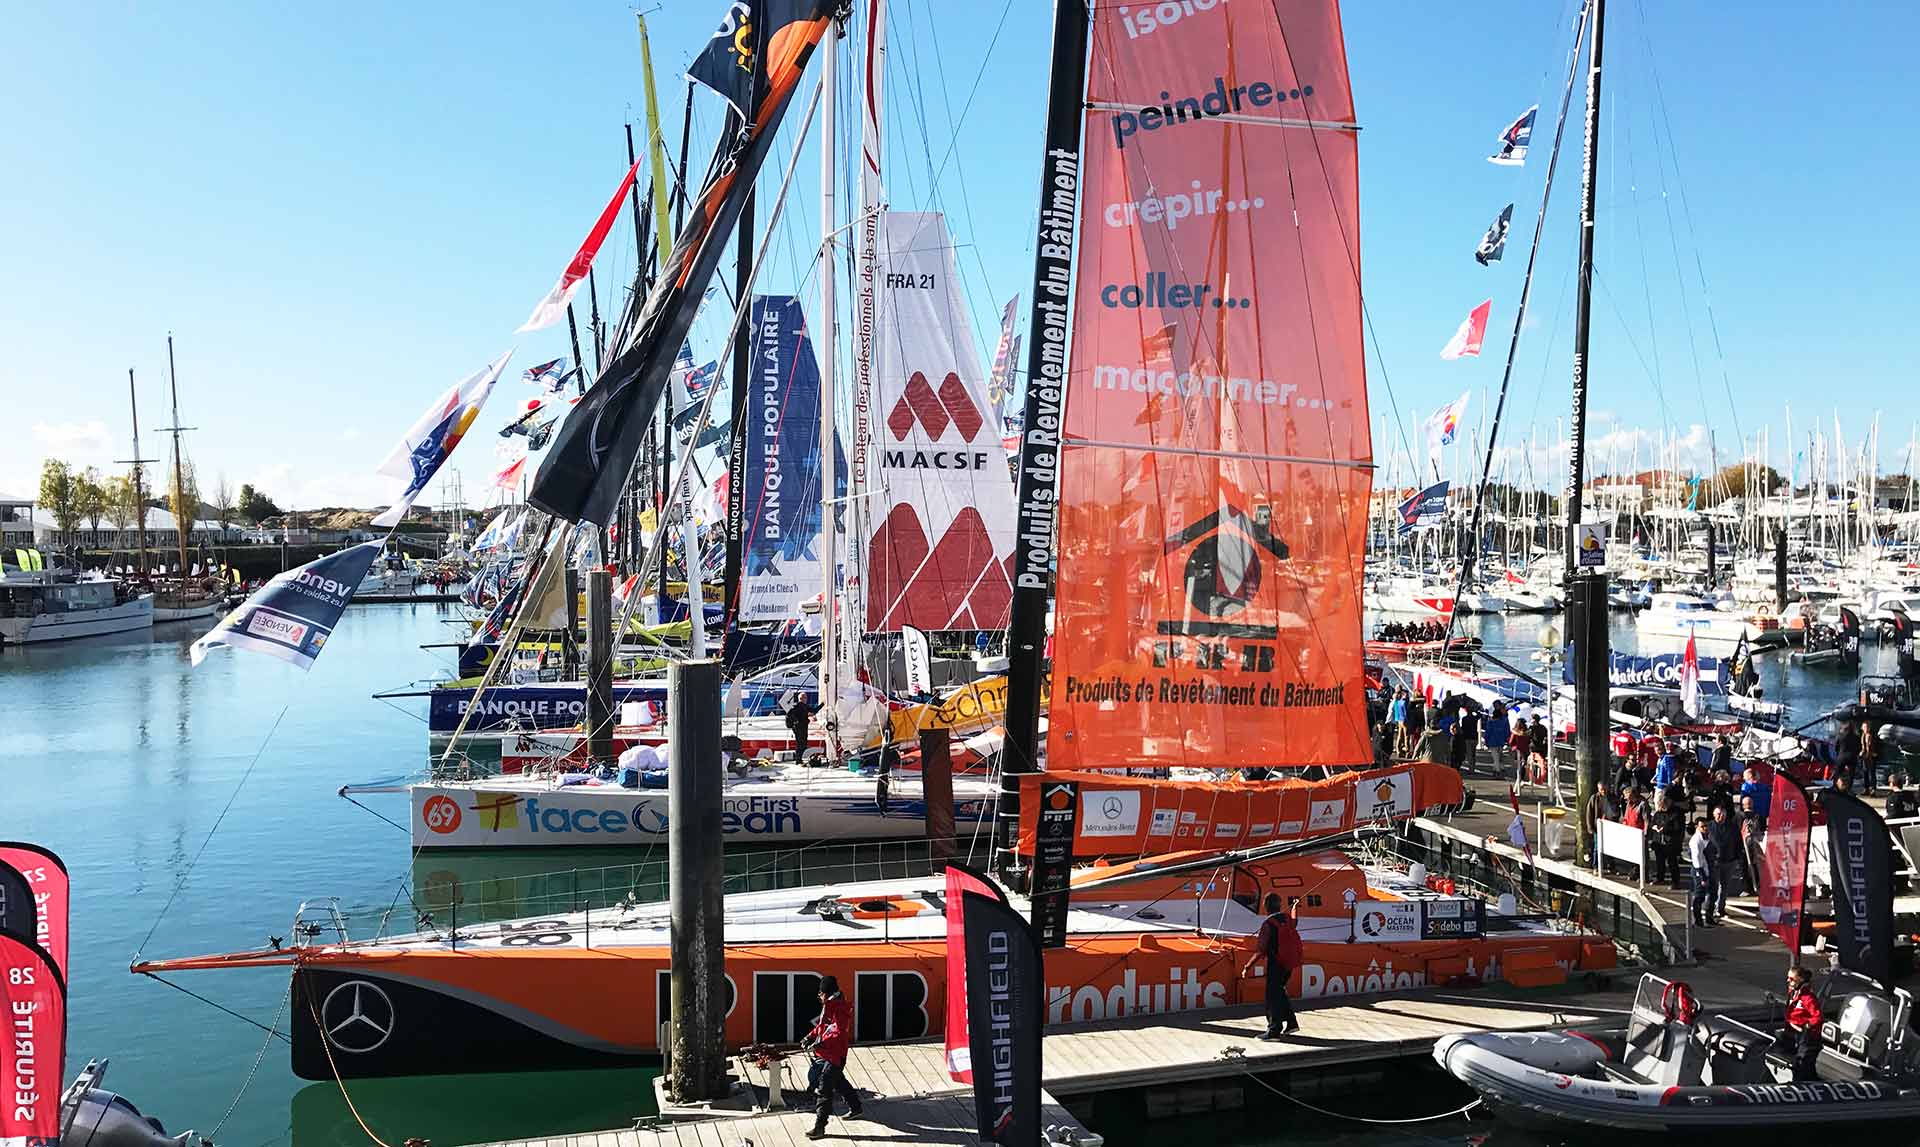 The show can begin: Welcome to the Vendee Globe 2016!